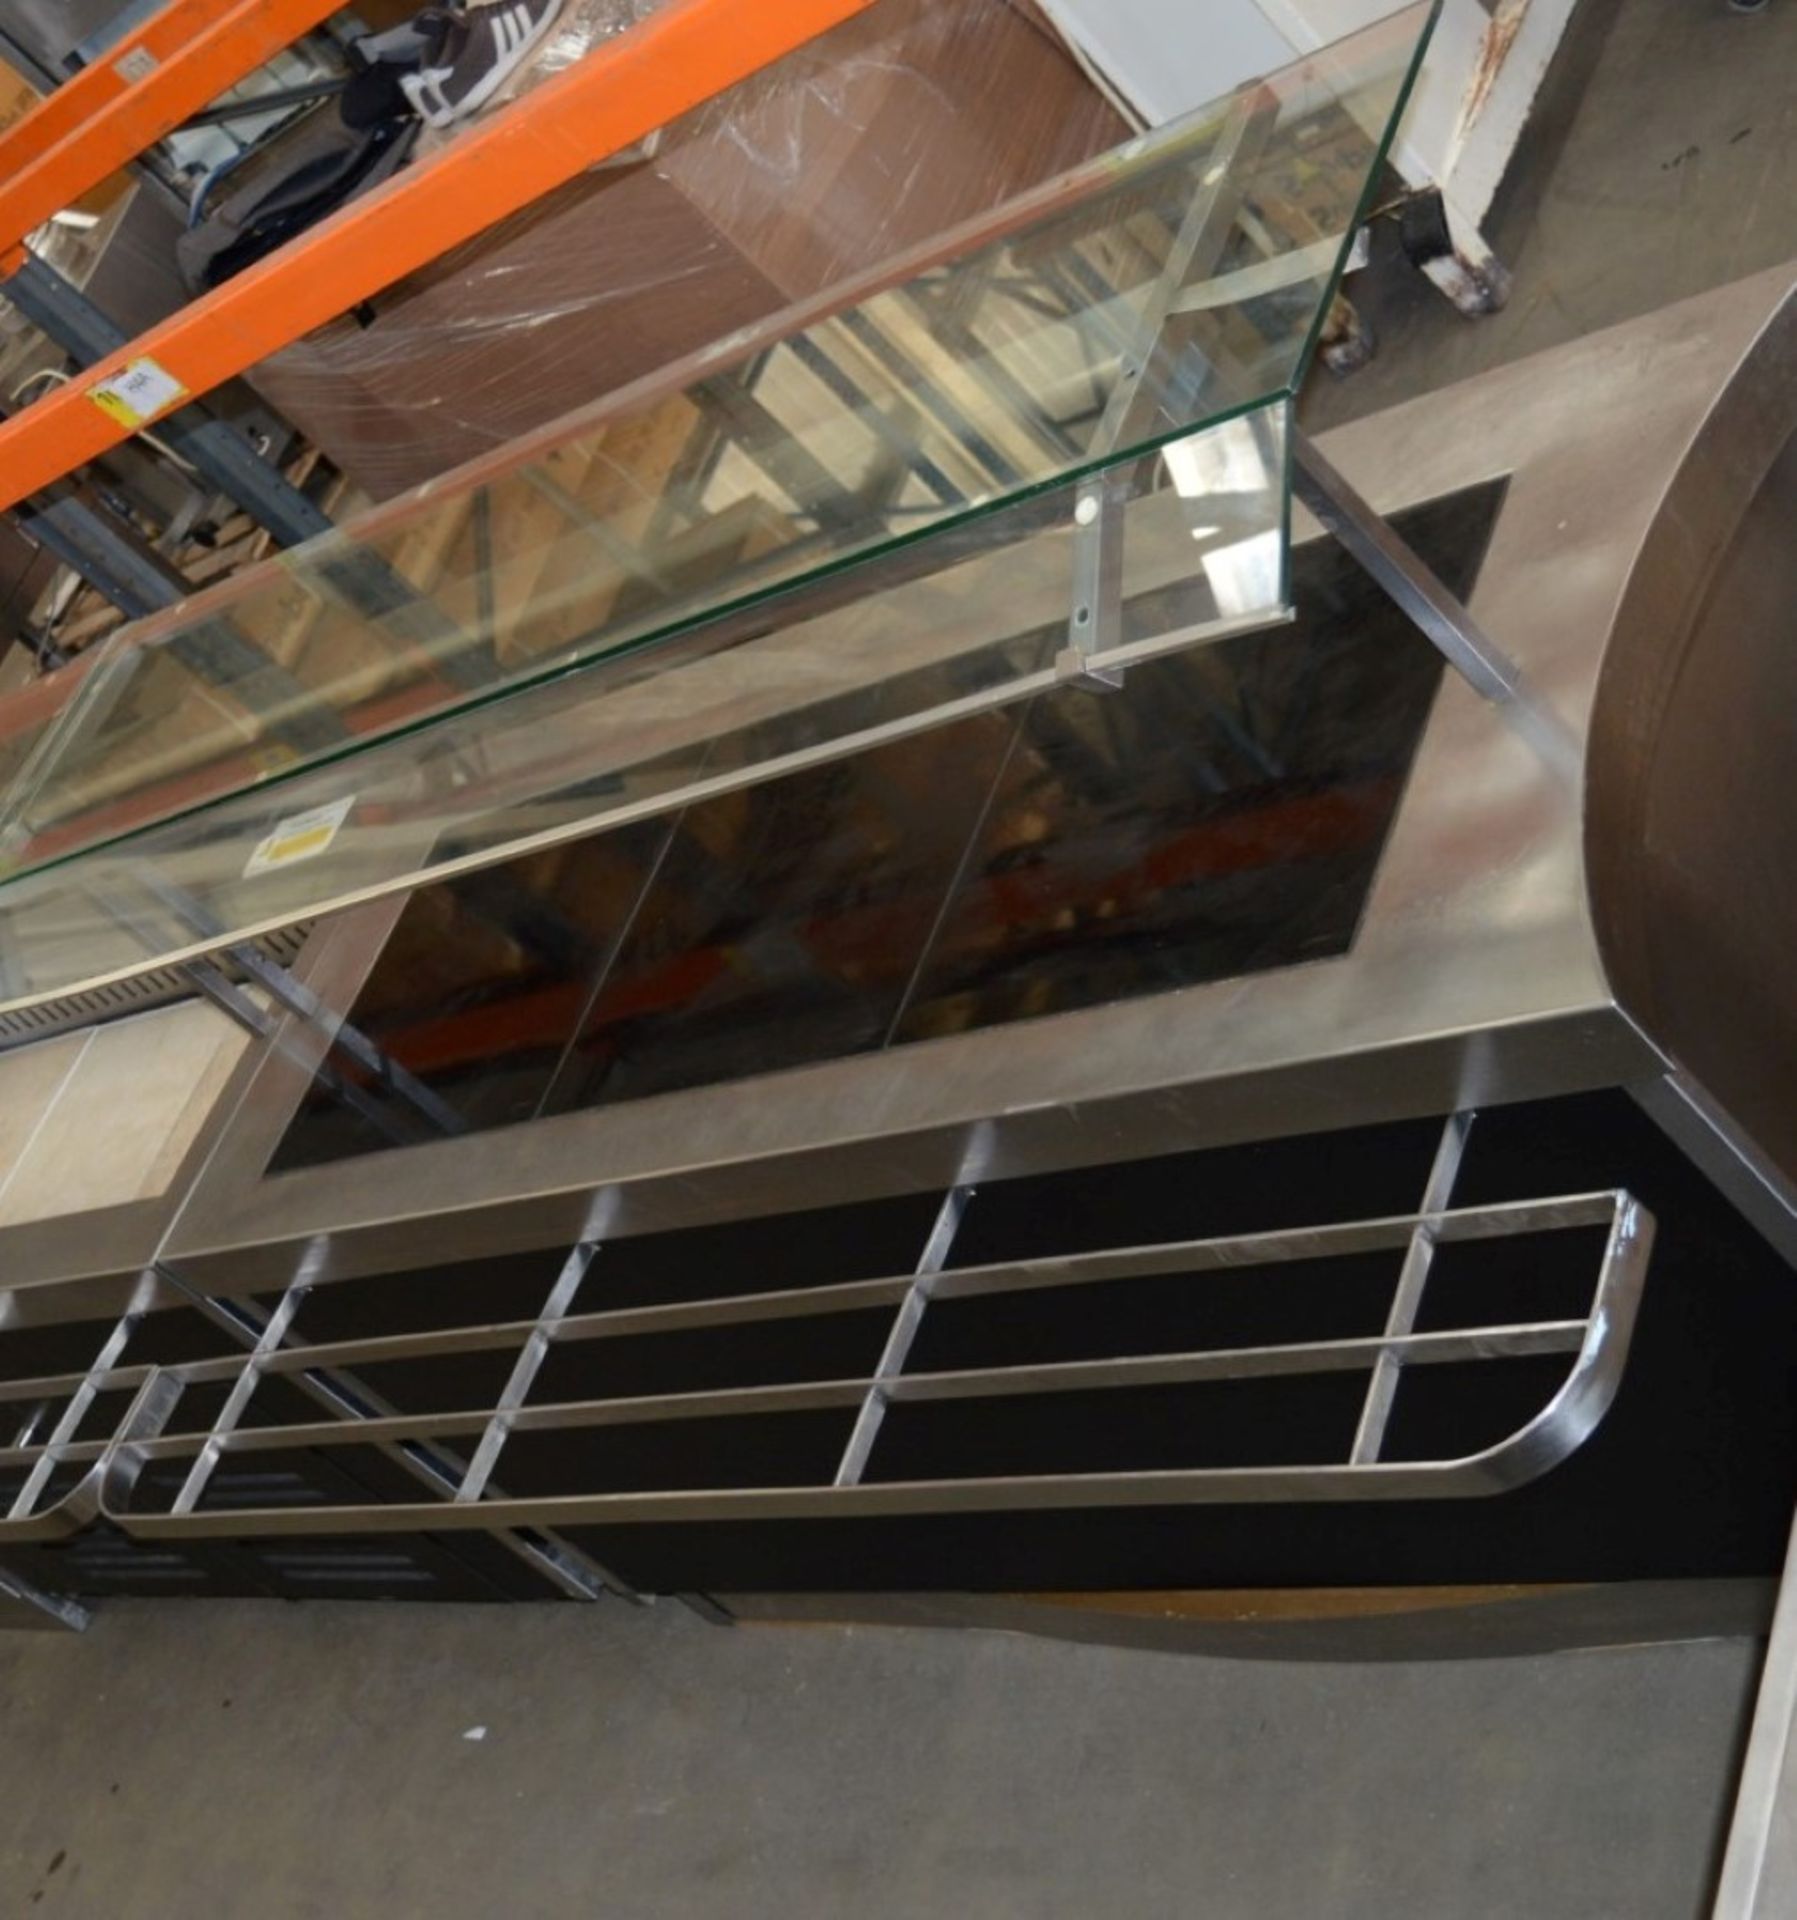 1 x Heated Ceran Serving Counter - Triple Ceran Hot Plates Plus Overhead Heating - On Castors For - Image 2 of 6